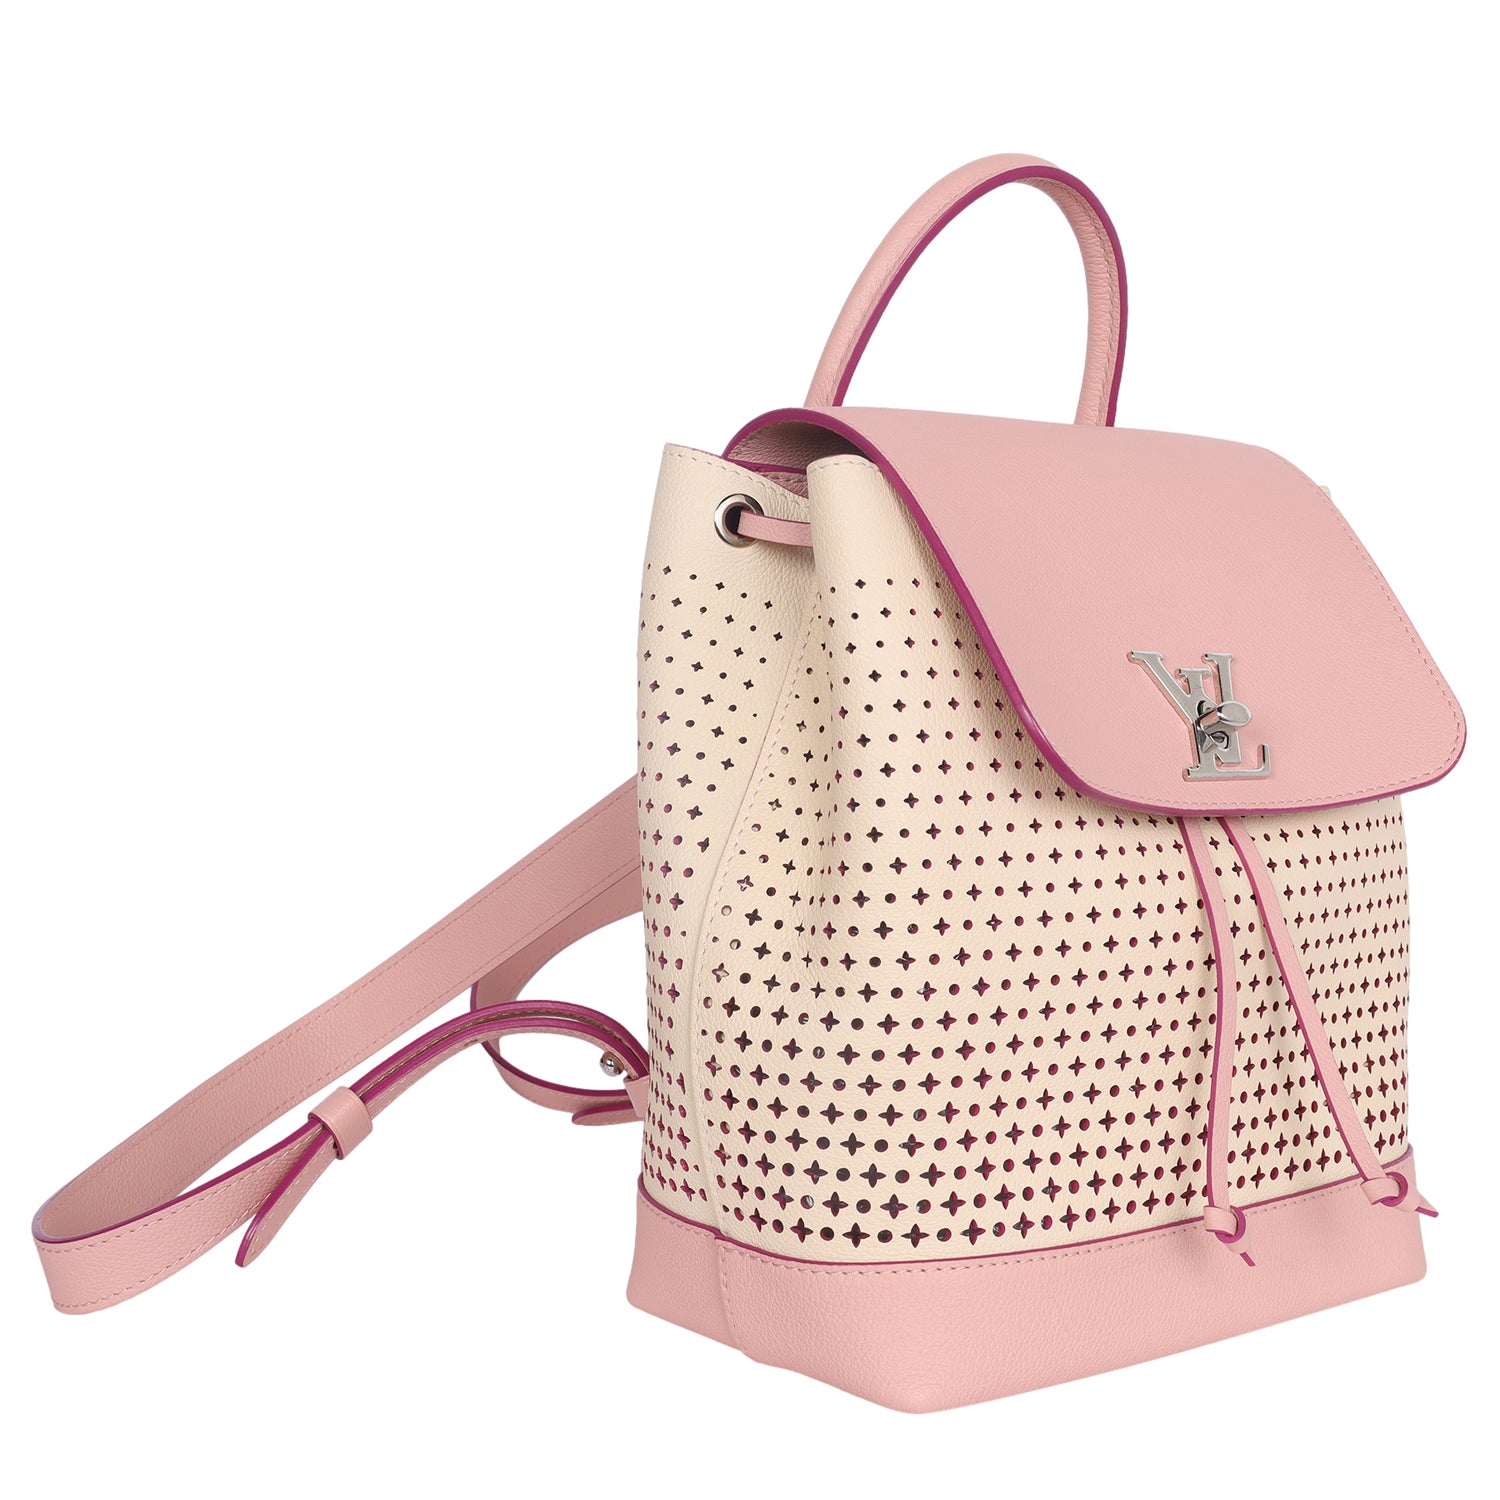 vuitton backpack pink